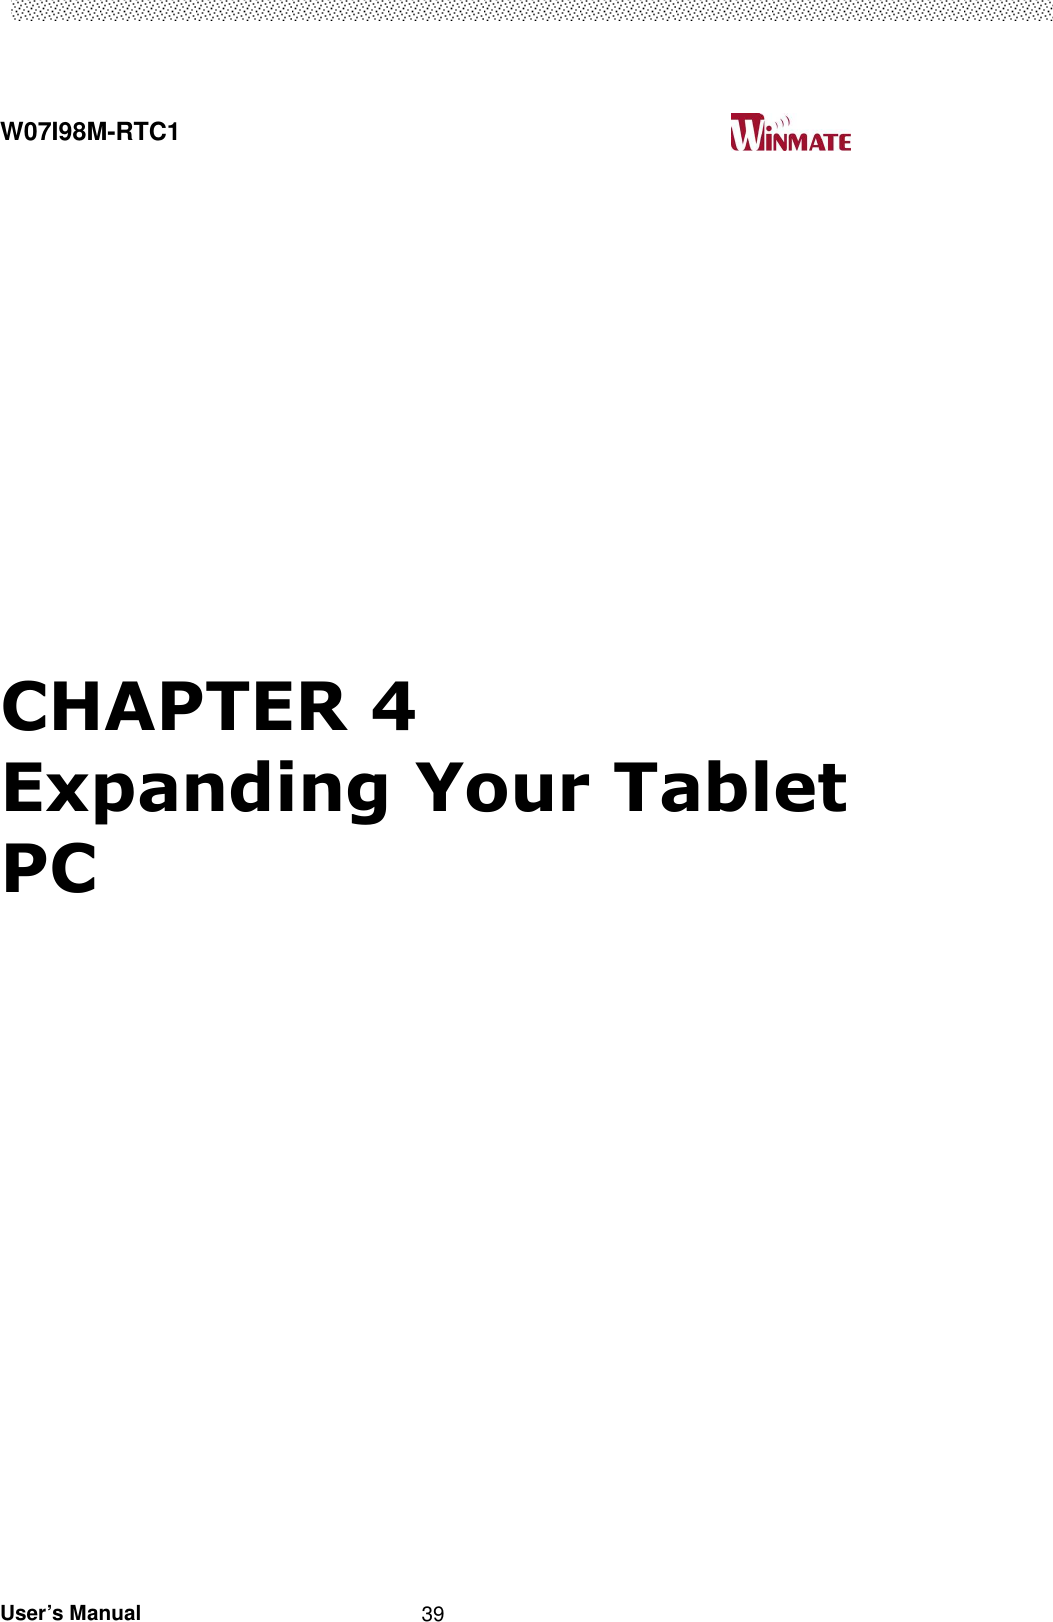  W07I98M-RTC1                                                                                   User’s Manual                                                   39       CHAPTER 4 Expanding Your Tablet PC      